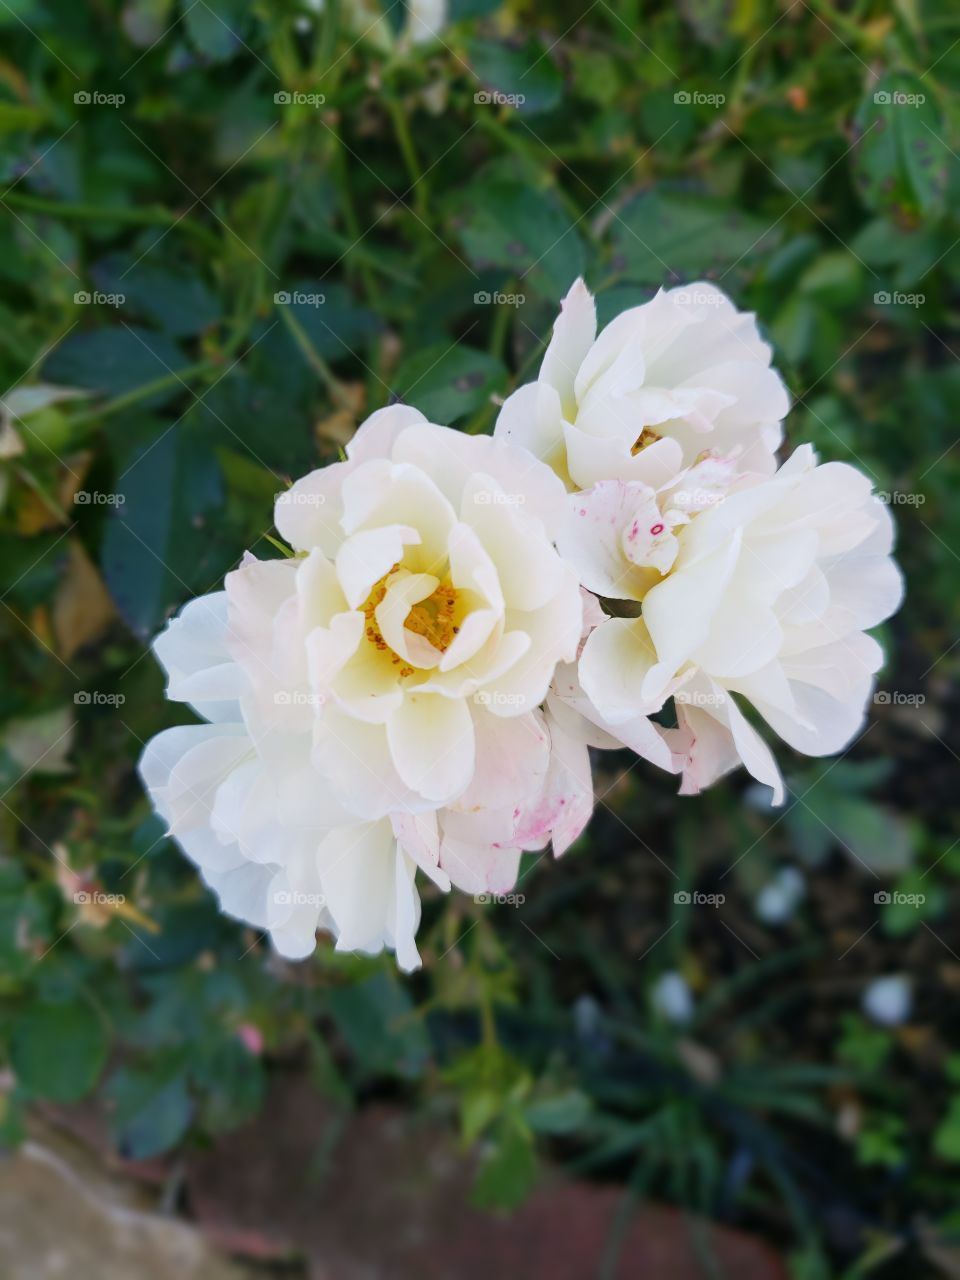 Roses in the fall. So pretty and delicate.